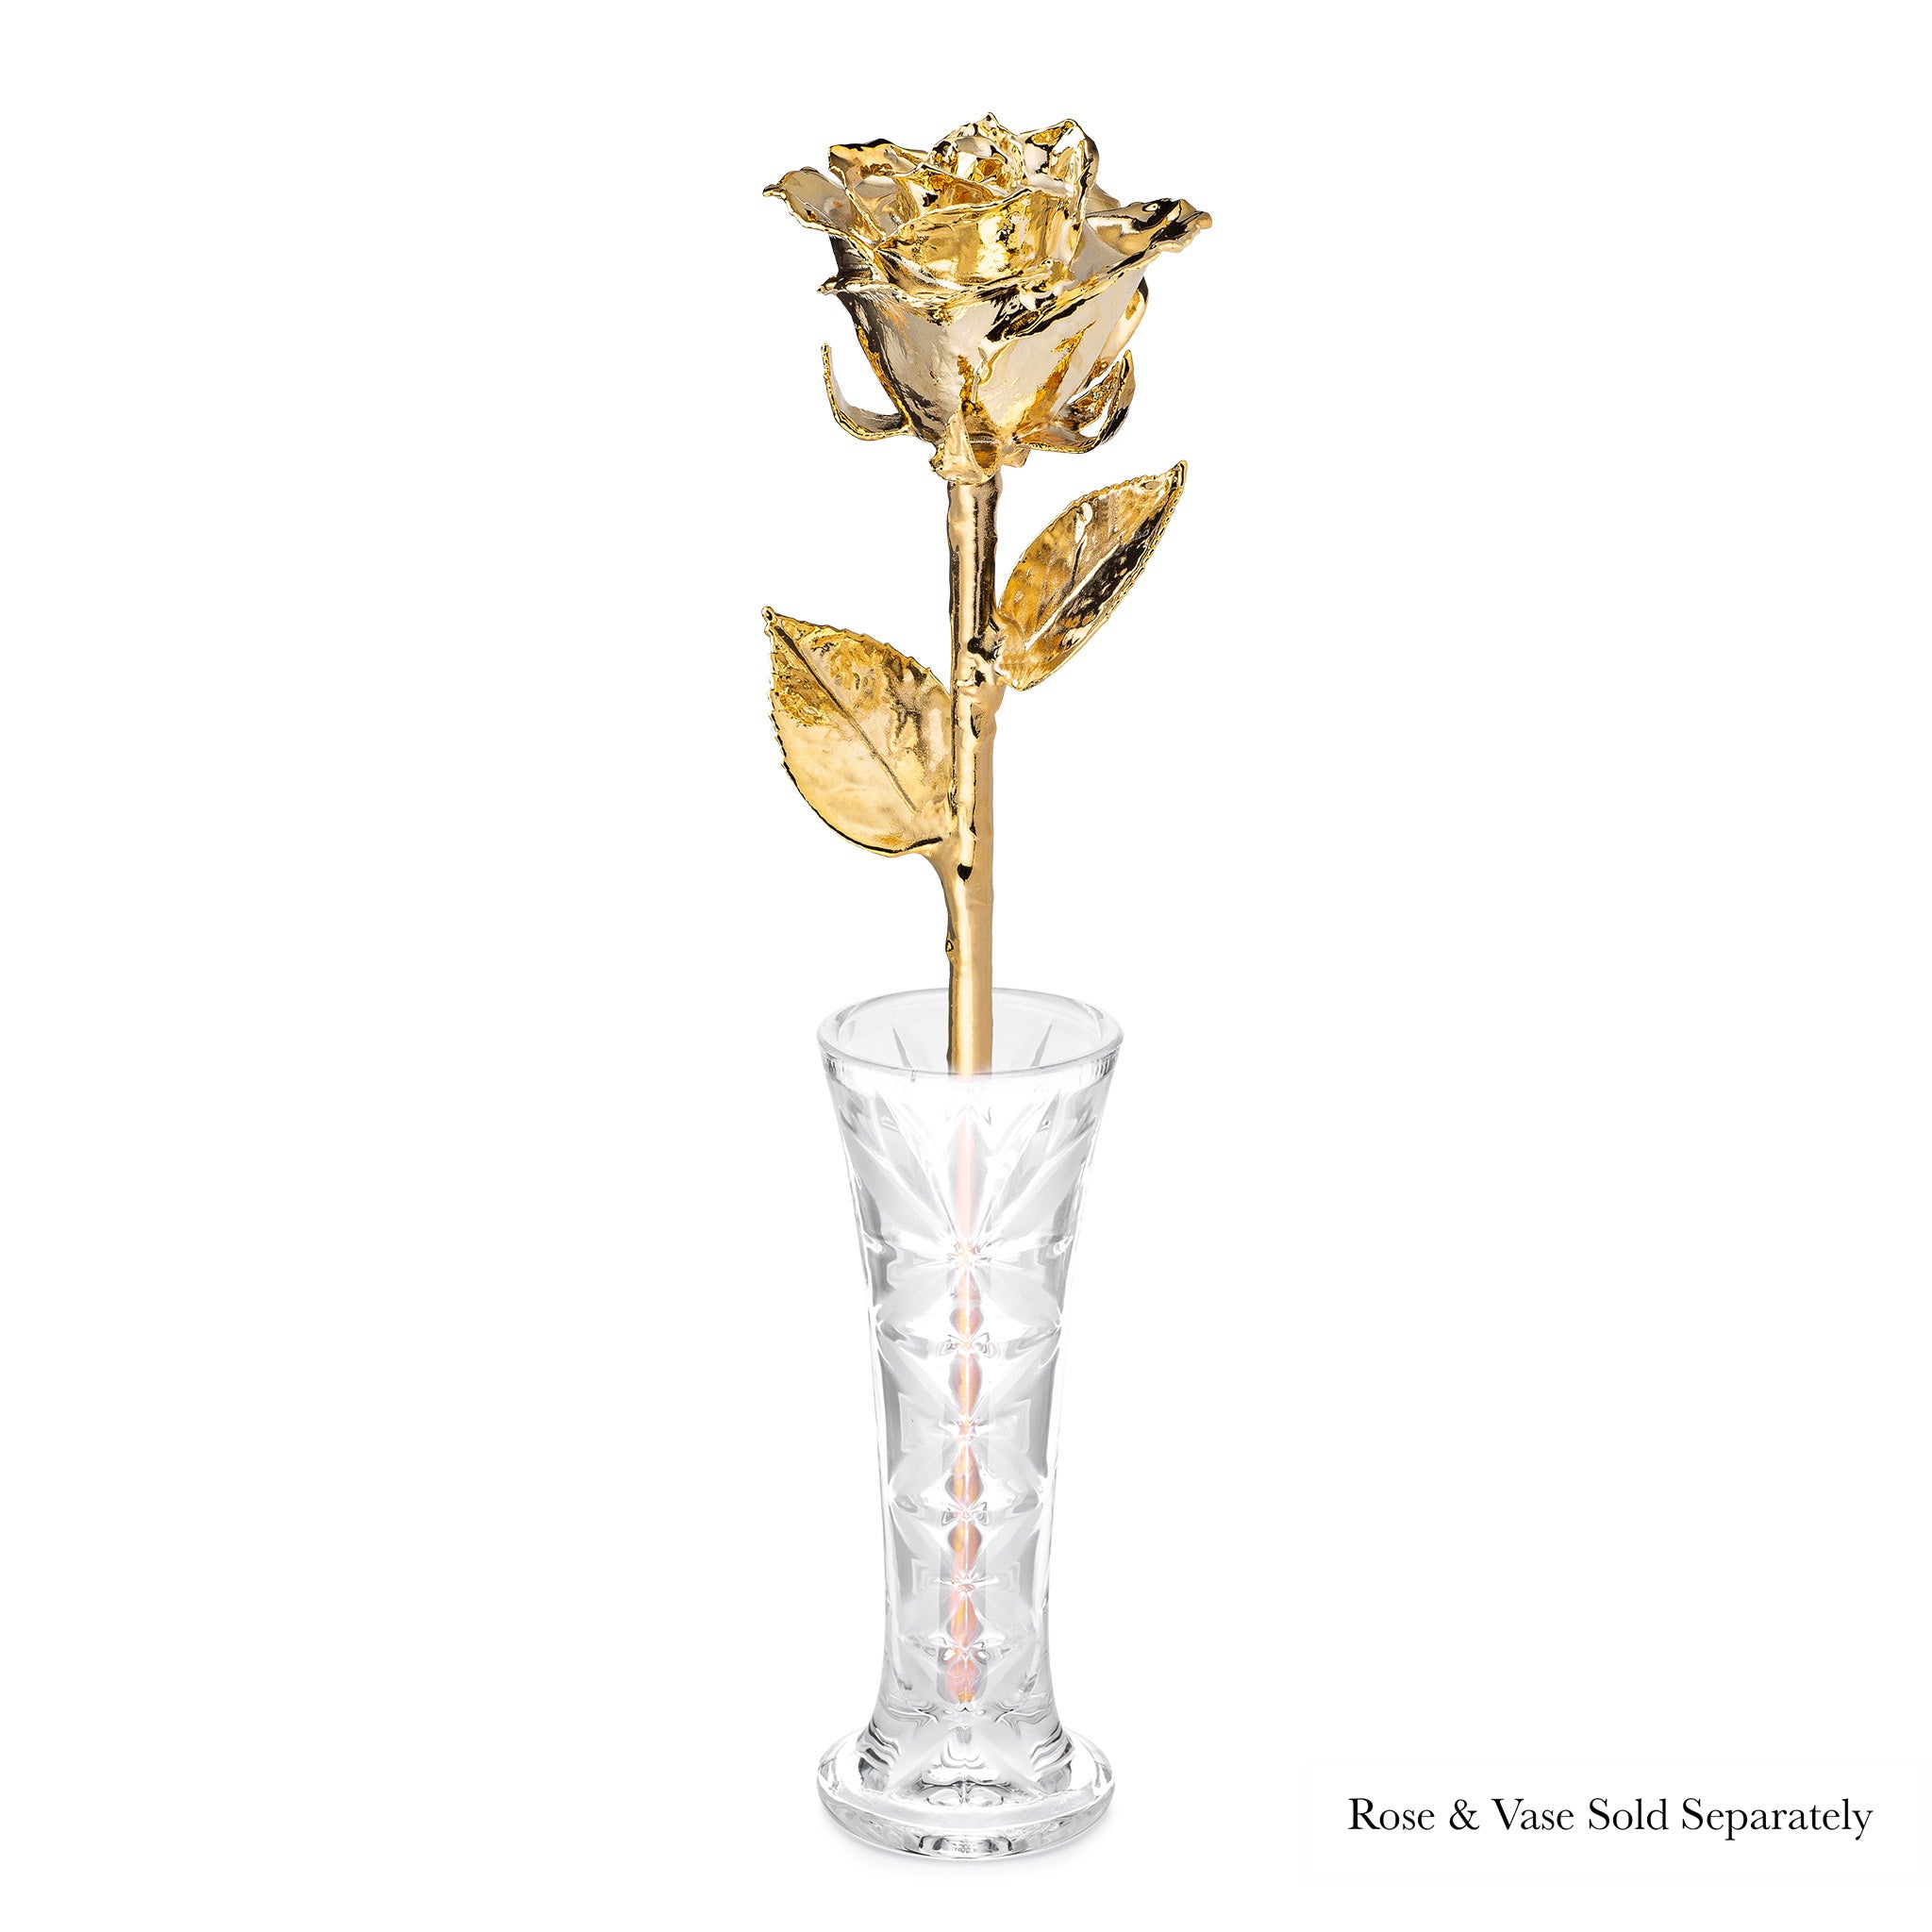 Real 24K Gold Forever Rose. Rose is fully dipped in gold. View shows the rose petals, sepals, stem, and leaves covered in 24 karat gold. The rose is shown in the optional crystal vase.